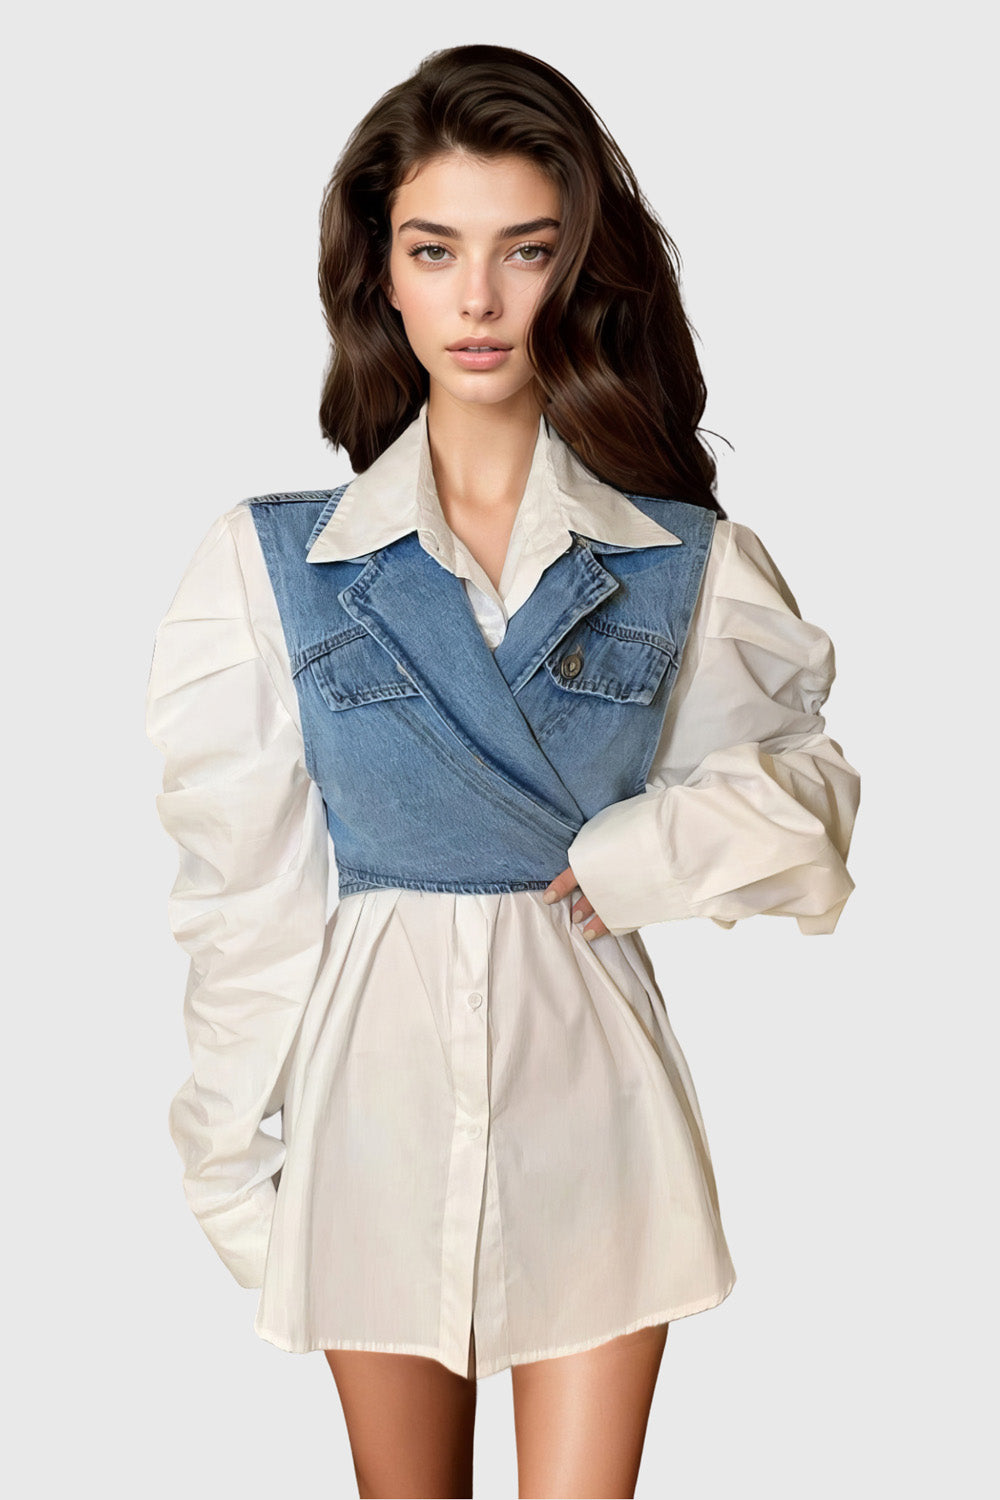 Denim Shirt with Vest Attached - White